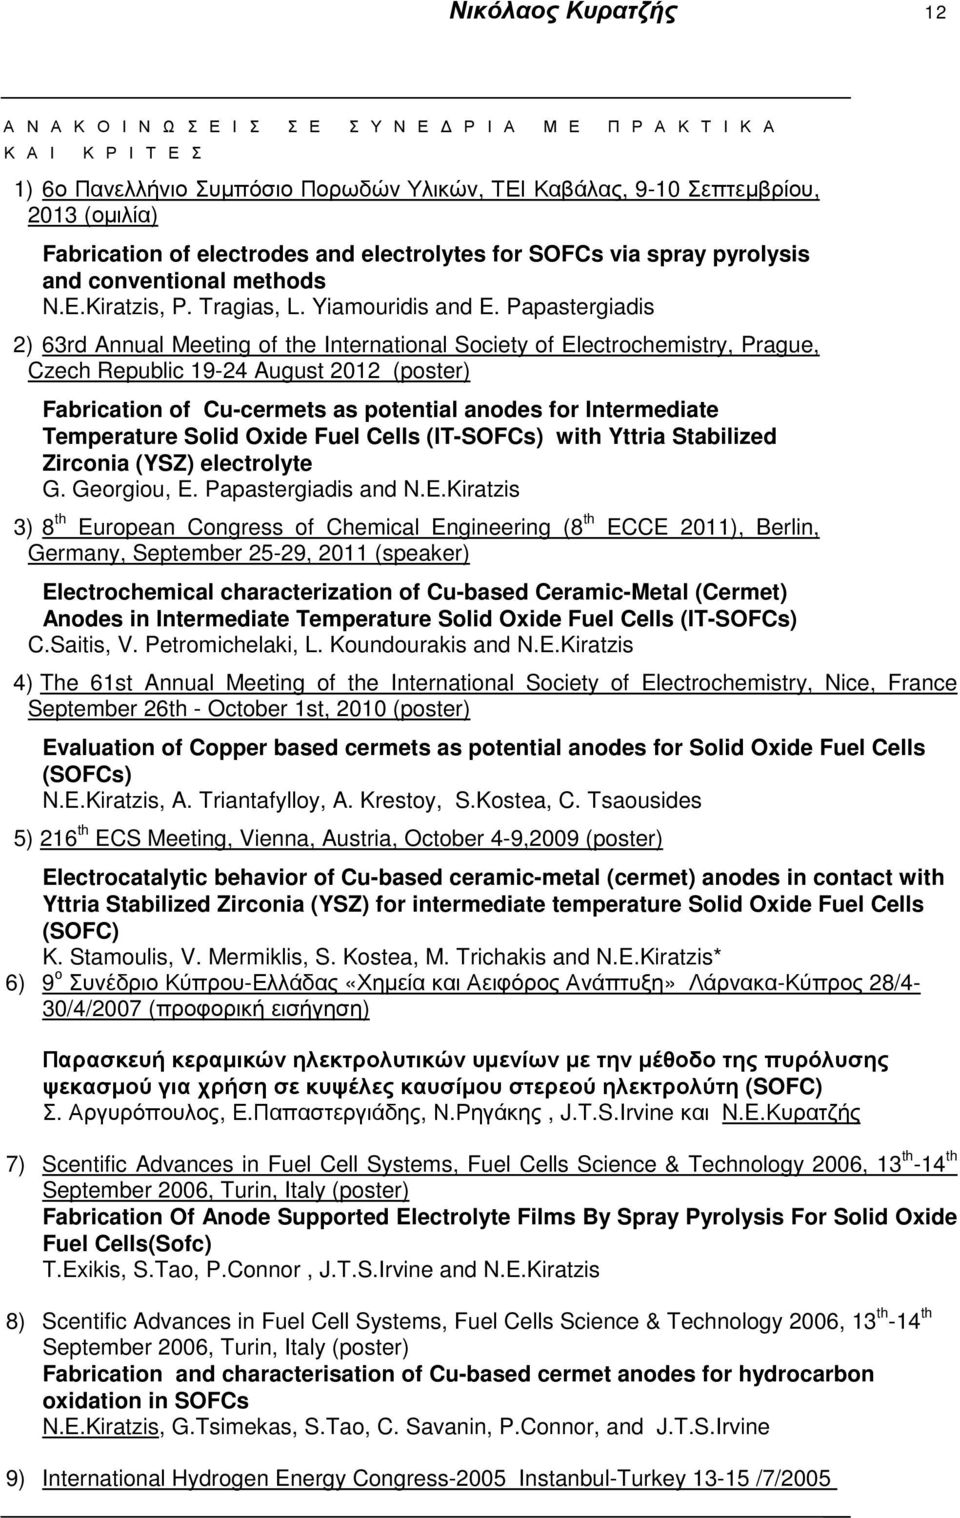 Papastergiadis 2) 63rd Annual Meeting of the International Society of Electrochemistry, Prague, Czech Republic 19-24 August 2012 (poster) Fabrication of Cu-cermets as potential anodes for